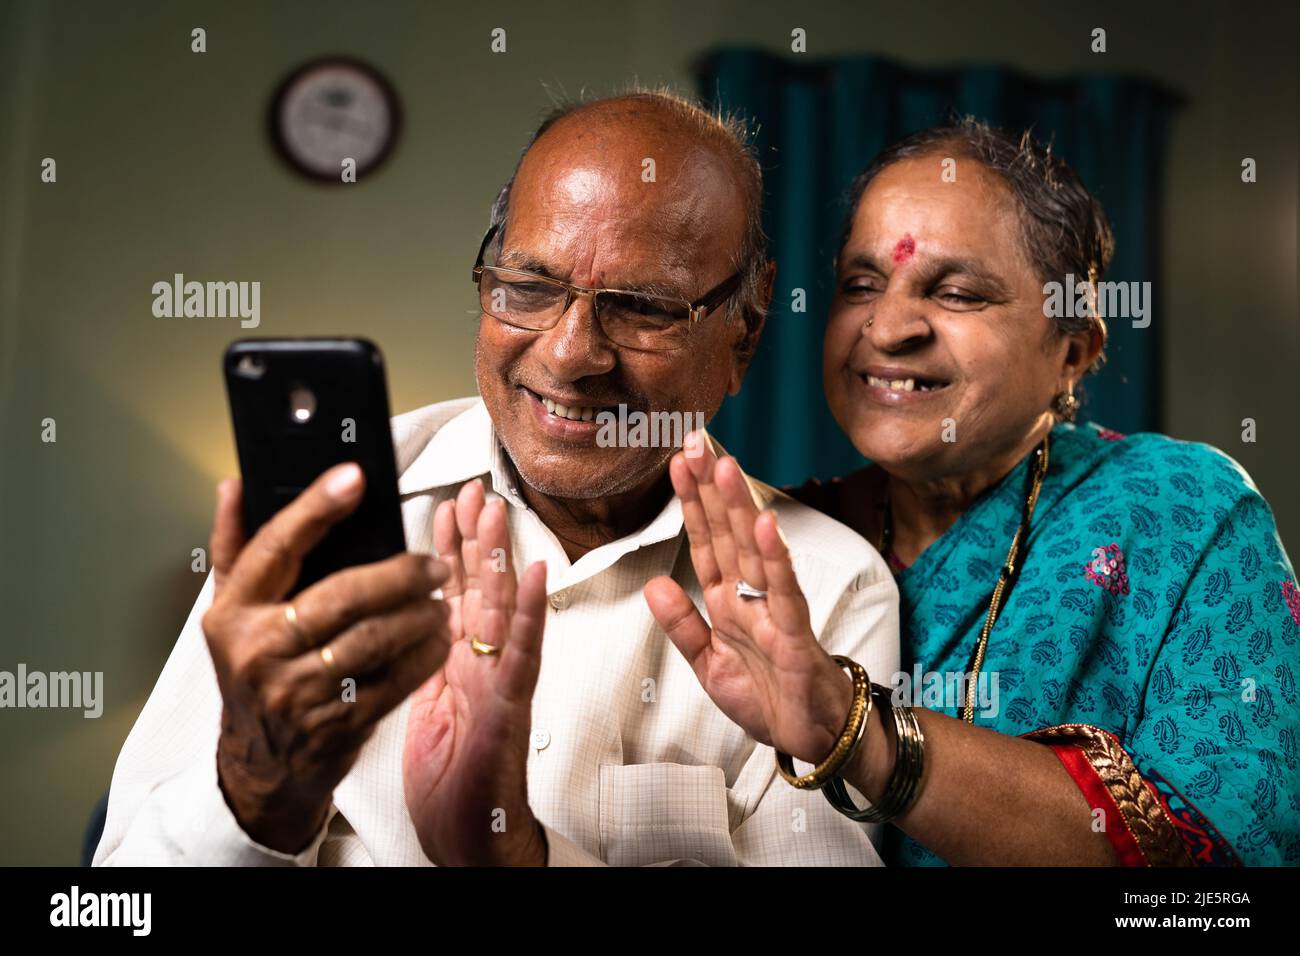 happy senior couple busy on making video call using smartphone at home - concept of technology, bonding and connection Stock Photo